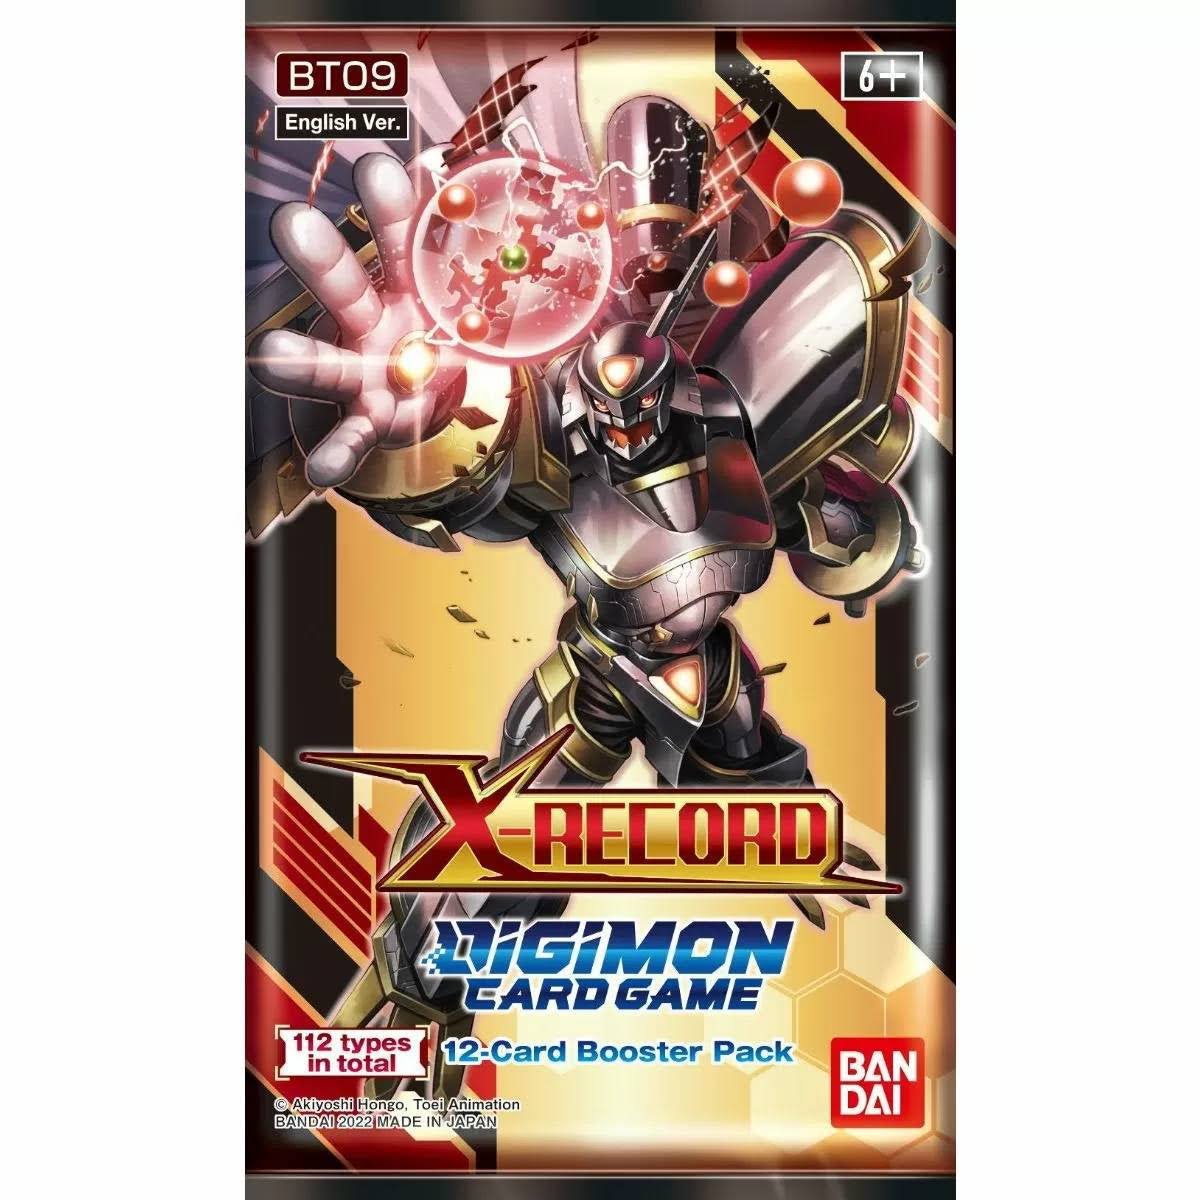 Digimon Card Game - x Record BT09 - Booster Pack